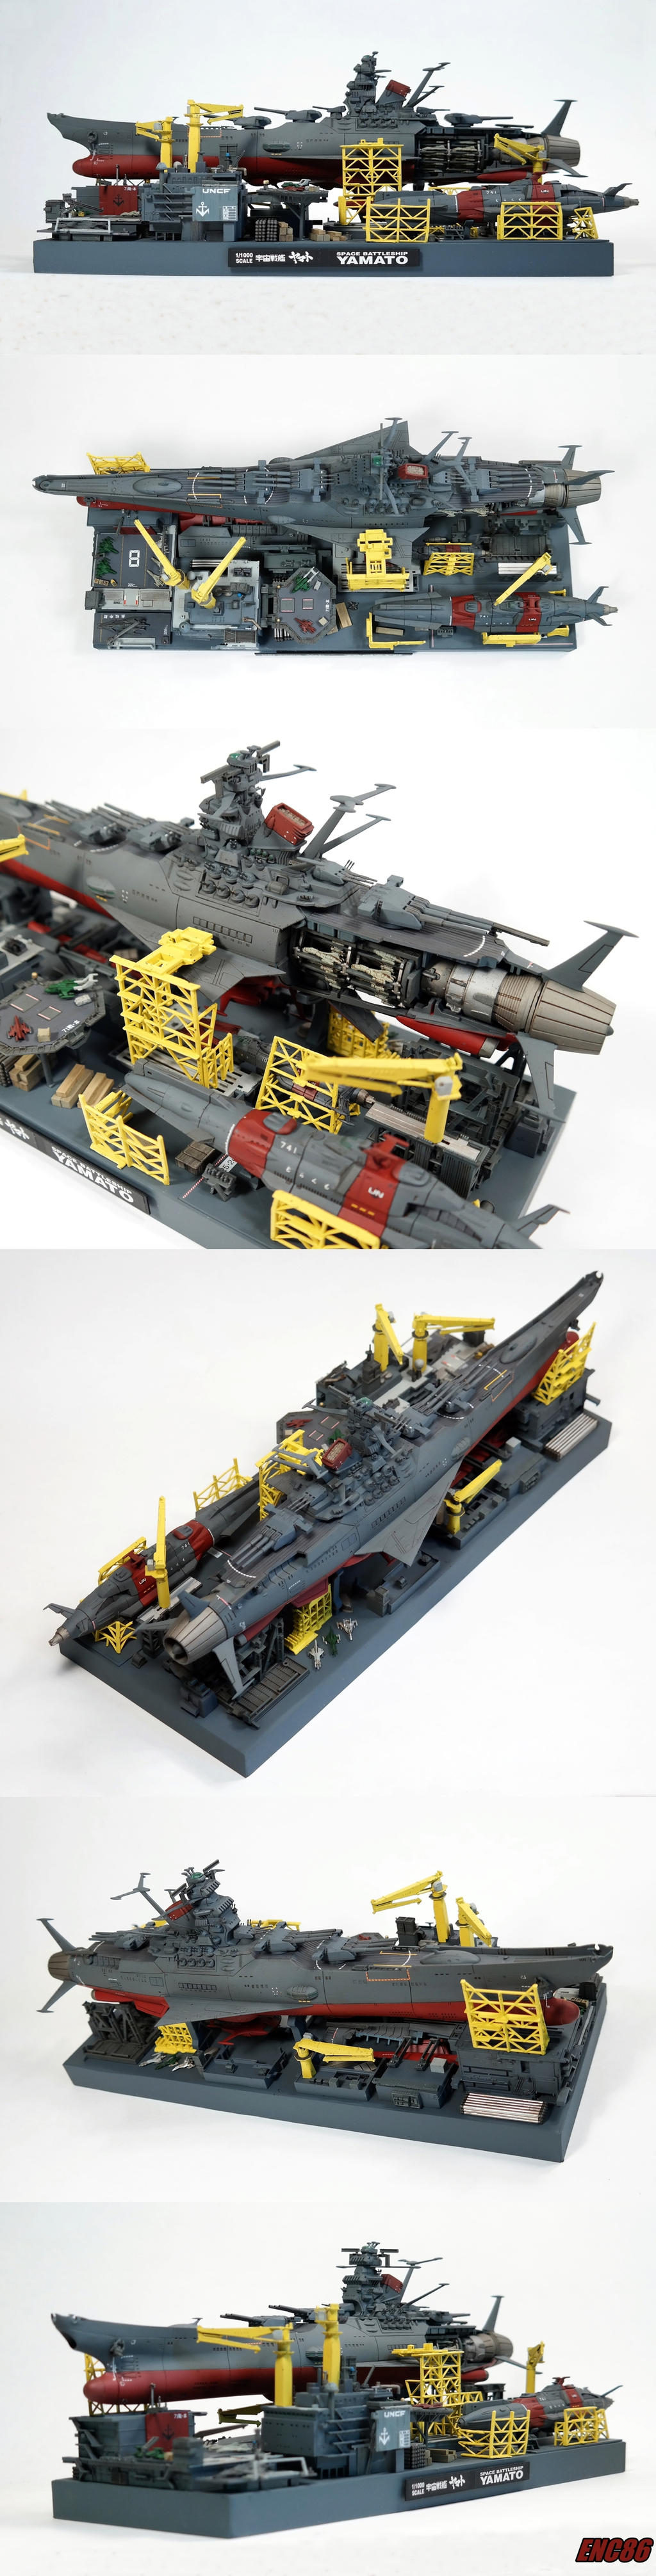 yamato_dry_dock_collage_by_enc86-d90qyj9